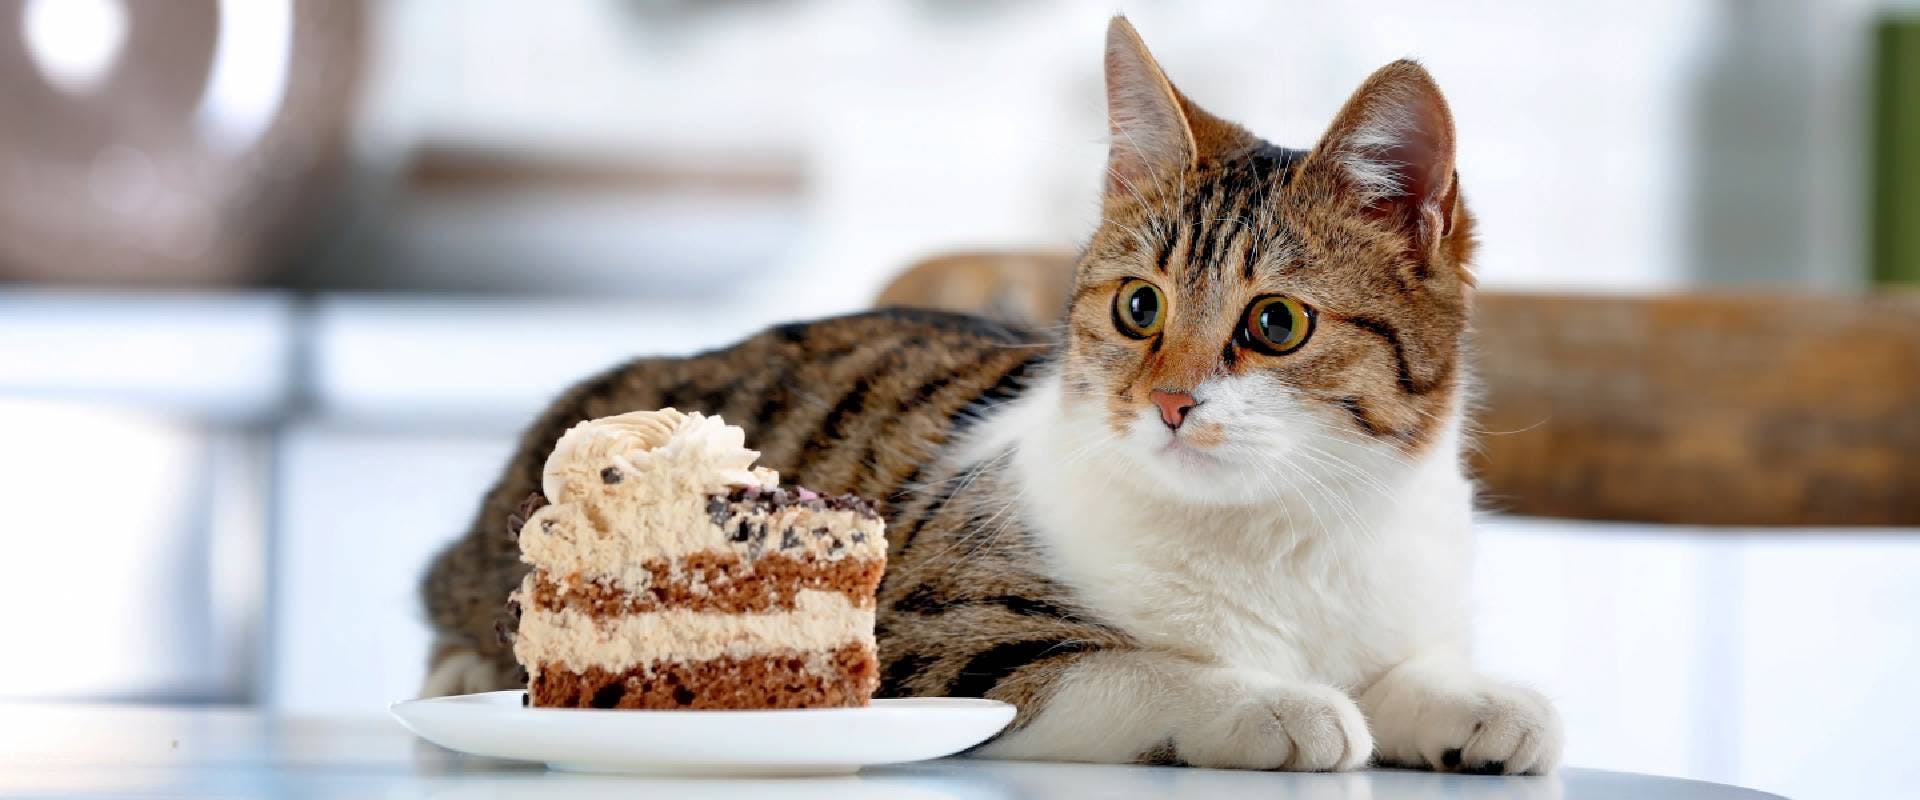 can cats eat dog cake